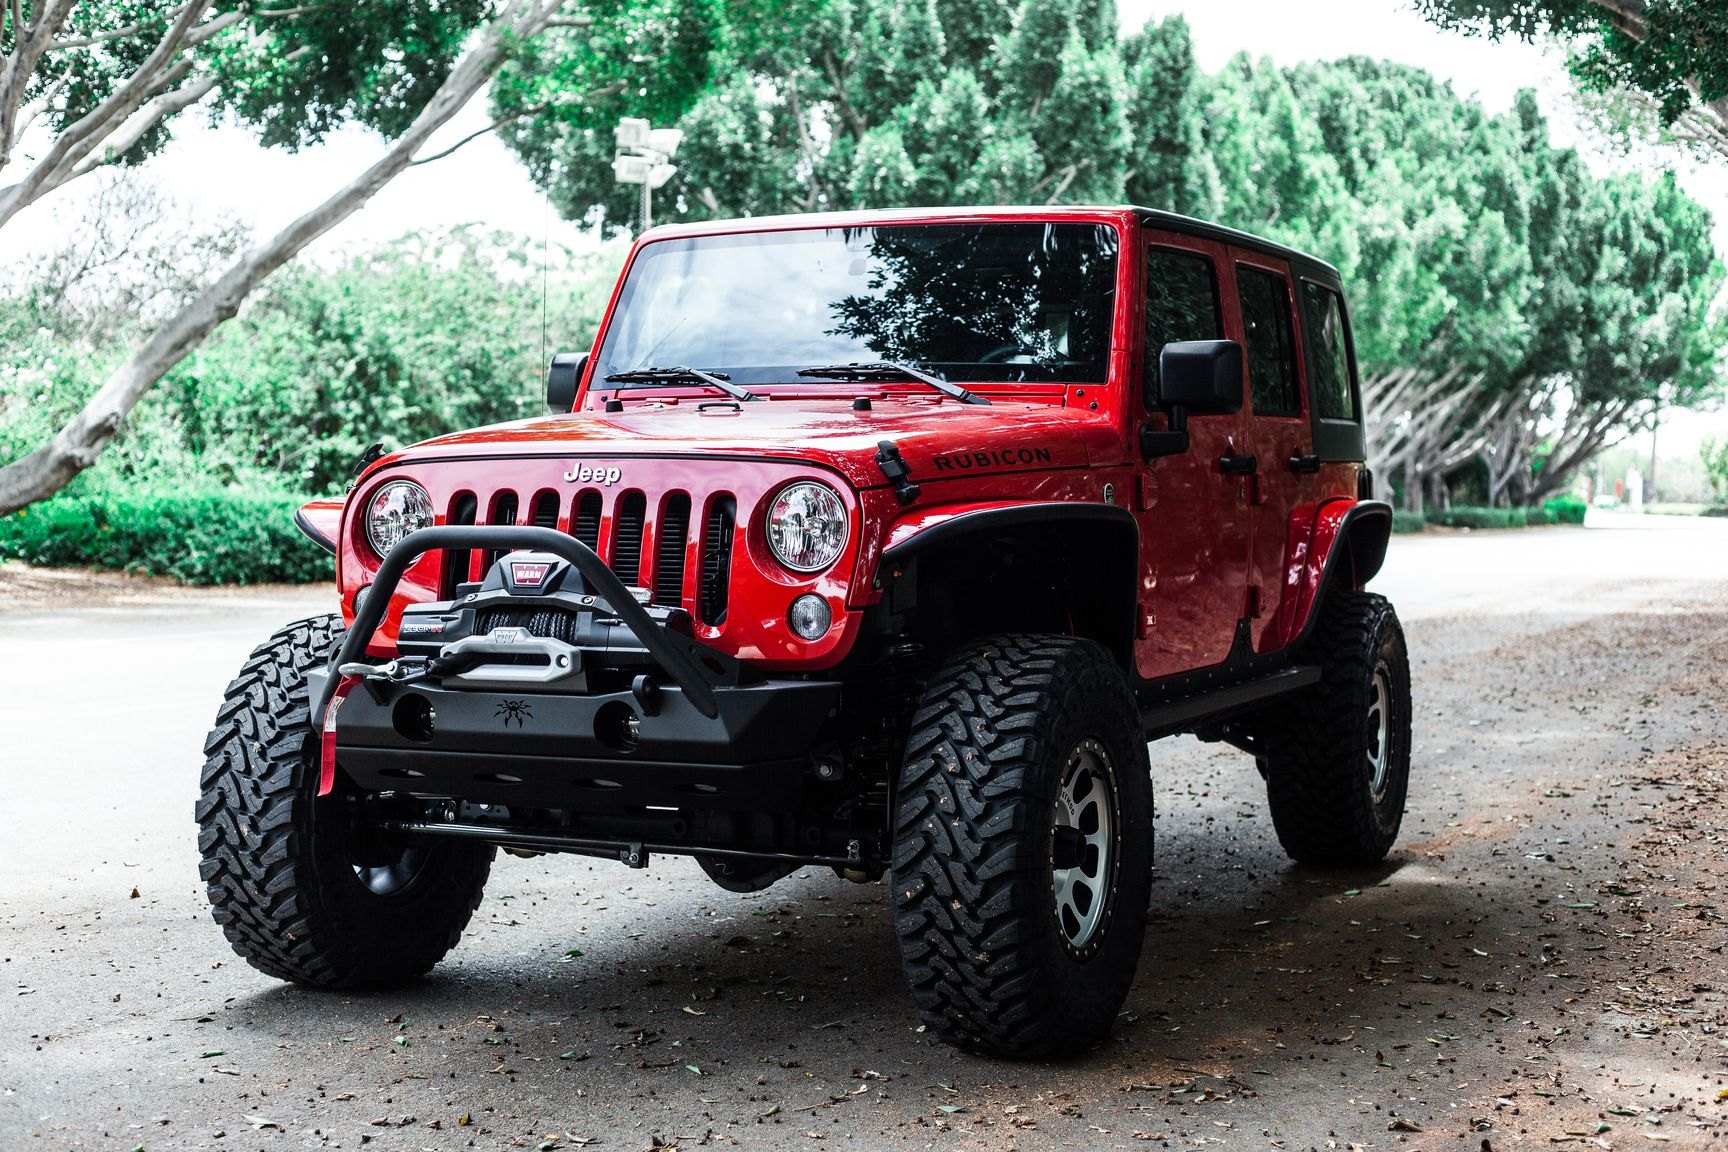 Poison Spyder Front Bumper on Red Jeep Wrangler Rubicon - Photo by Rebel Off-Road